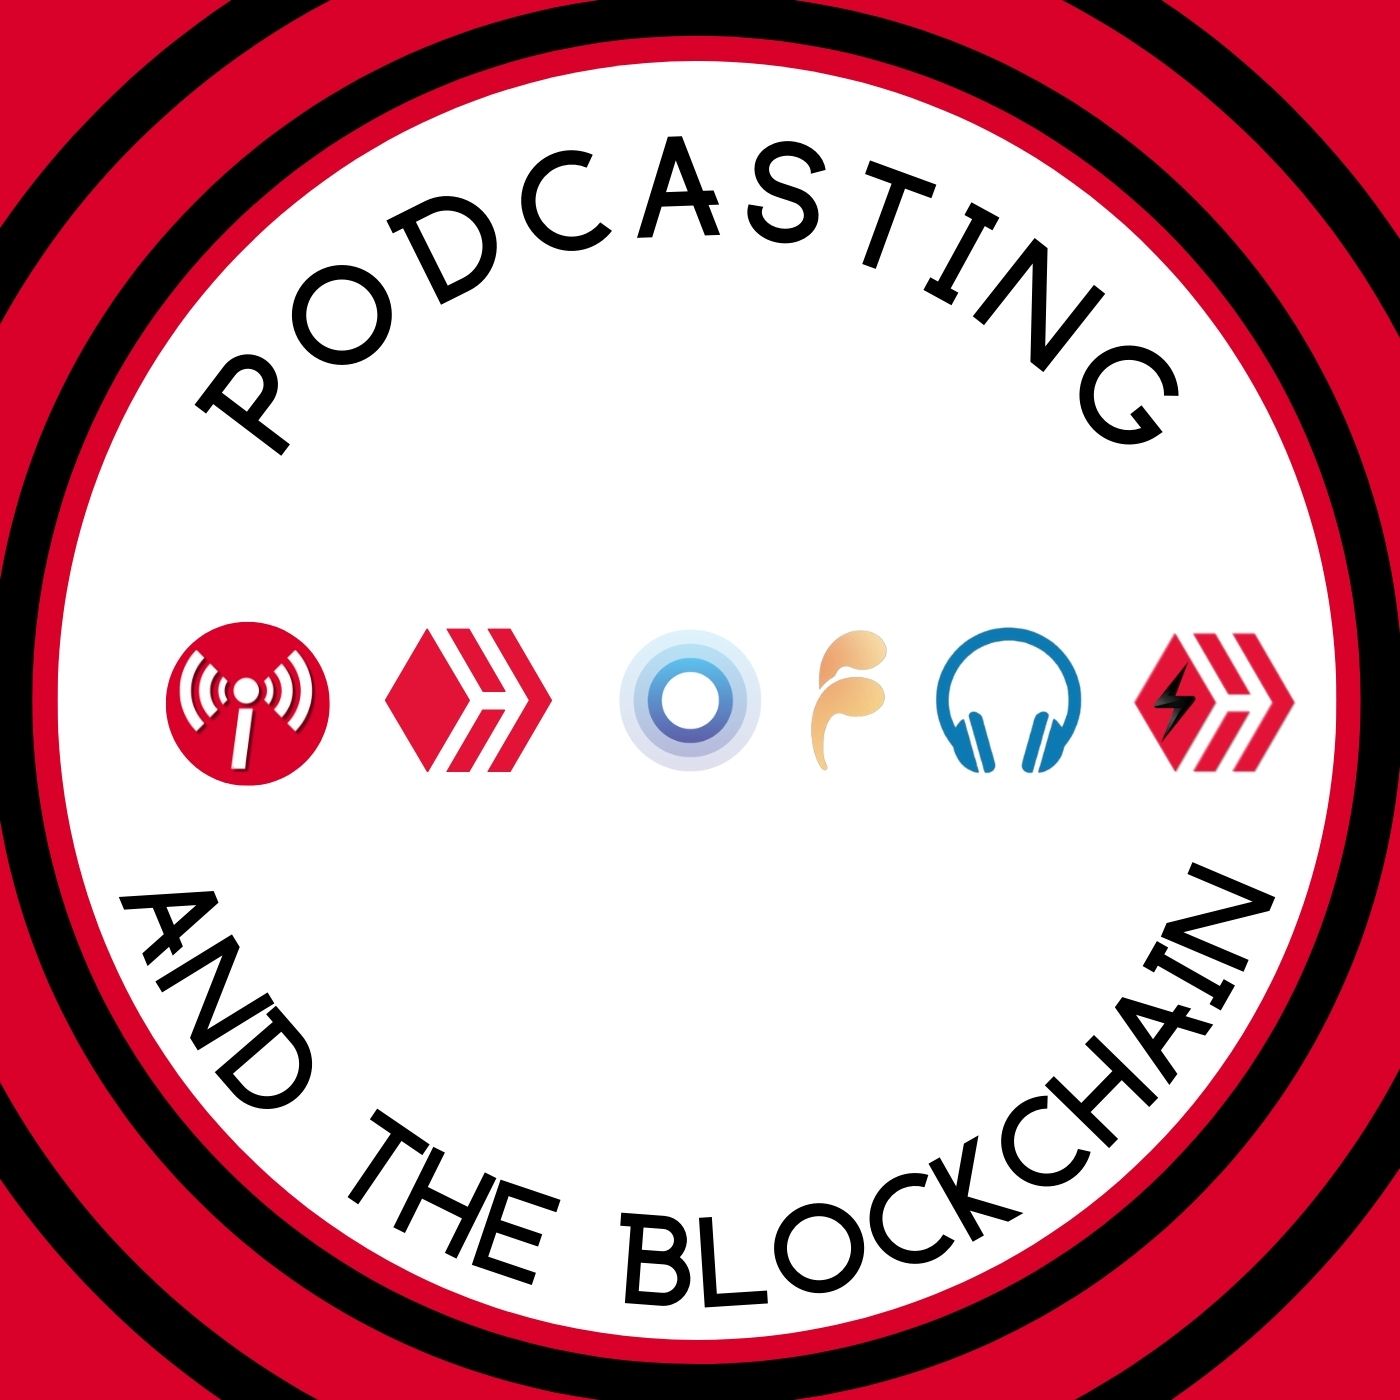 Podcasting and the Blockchain